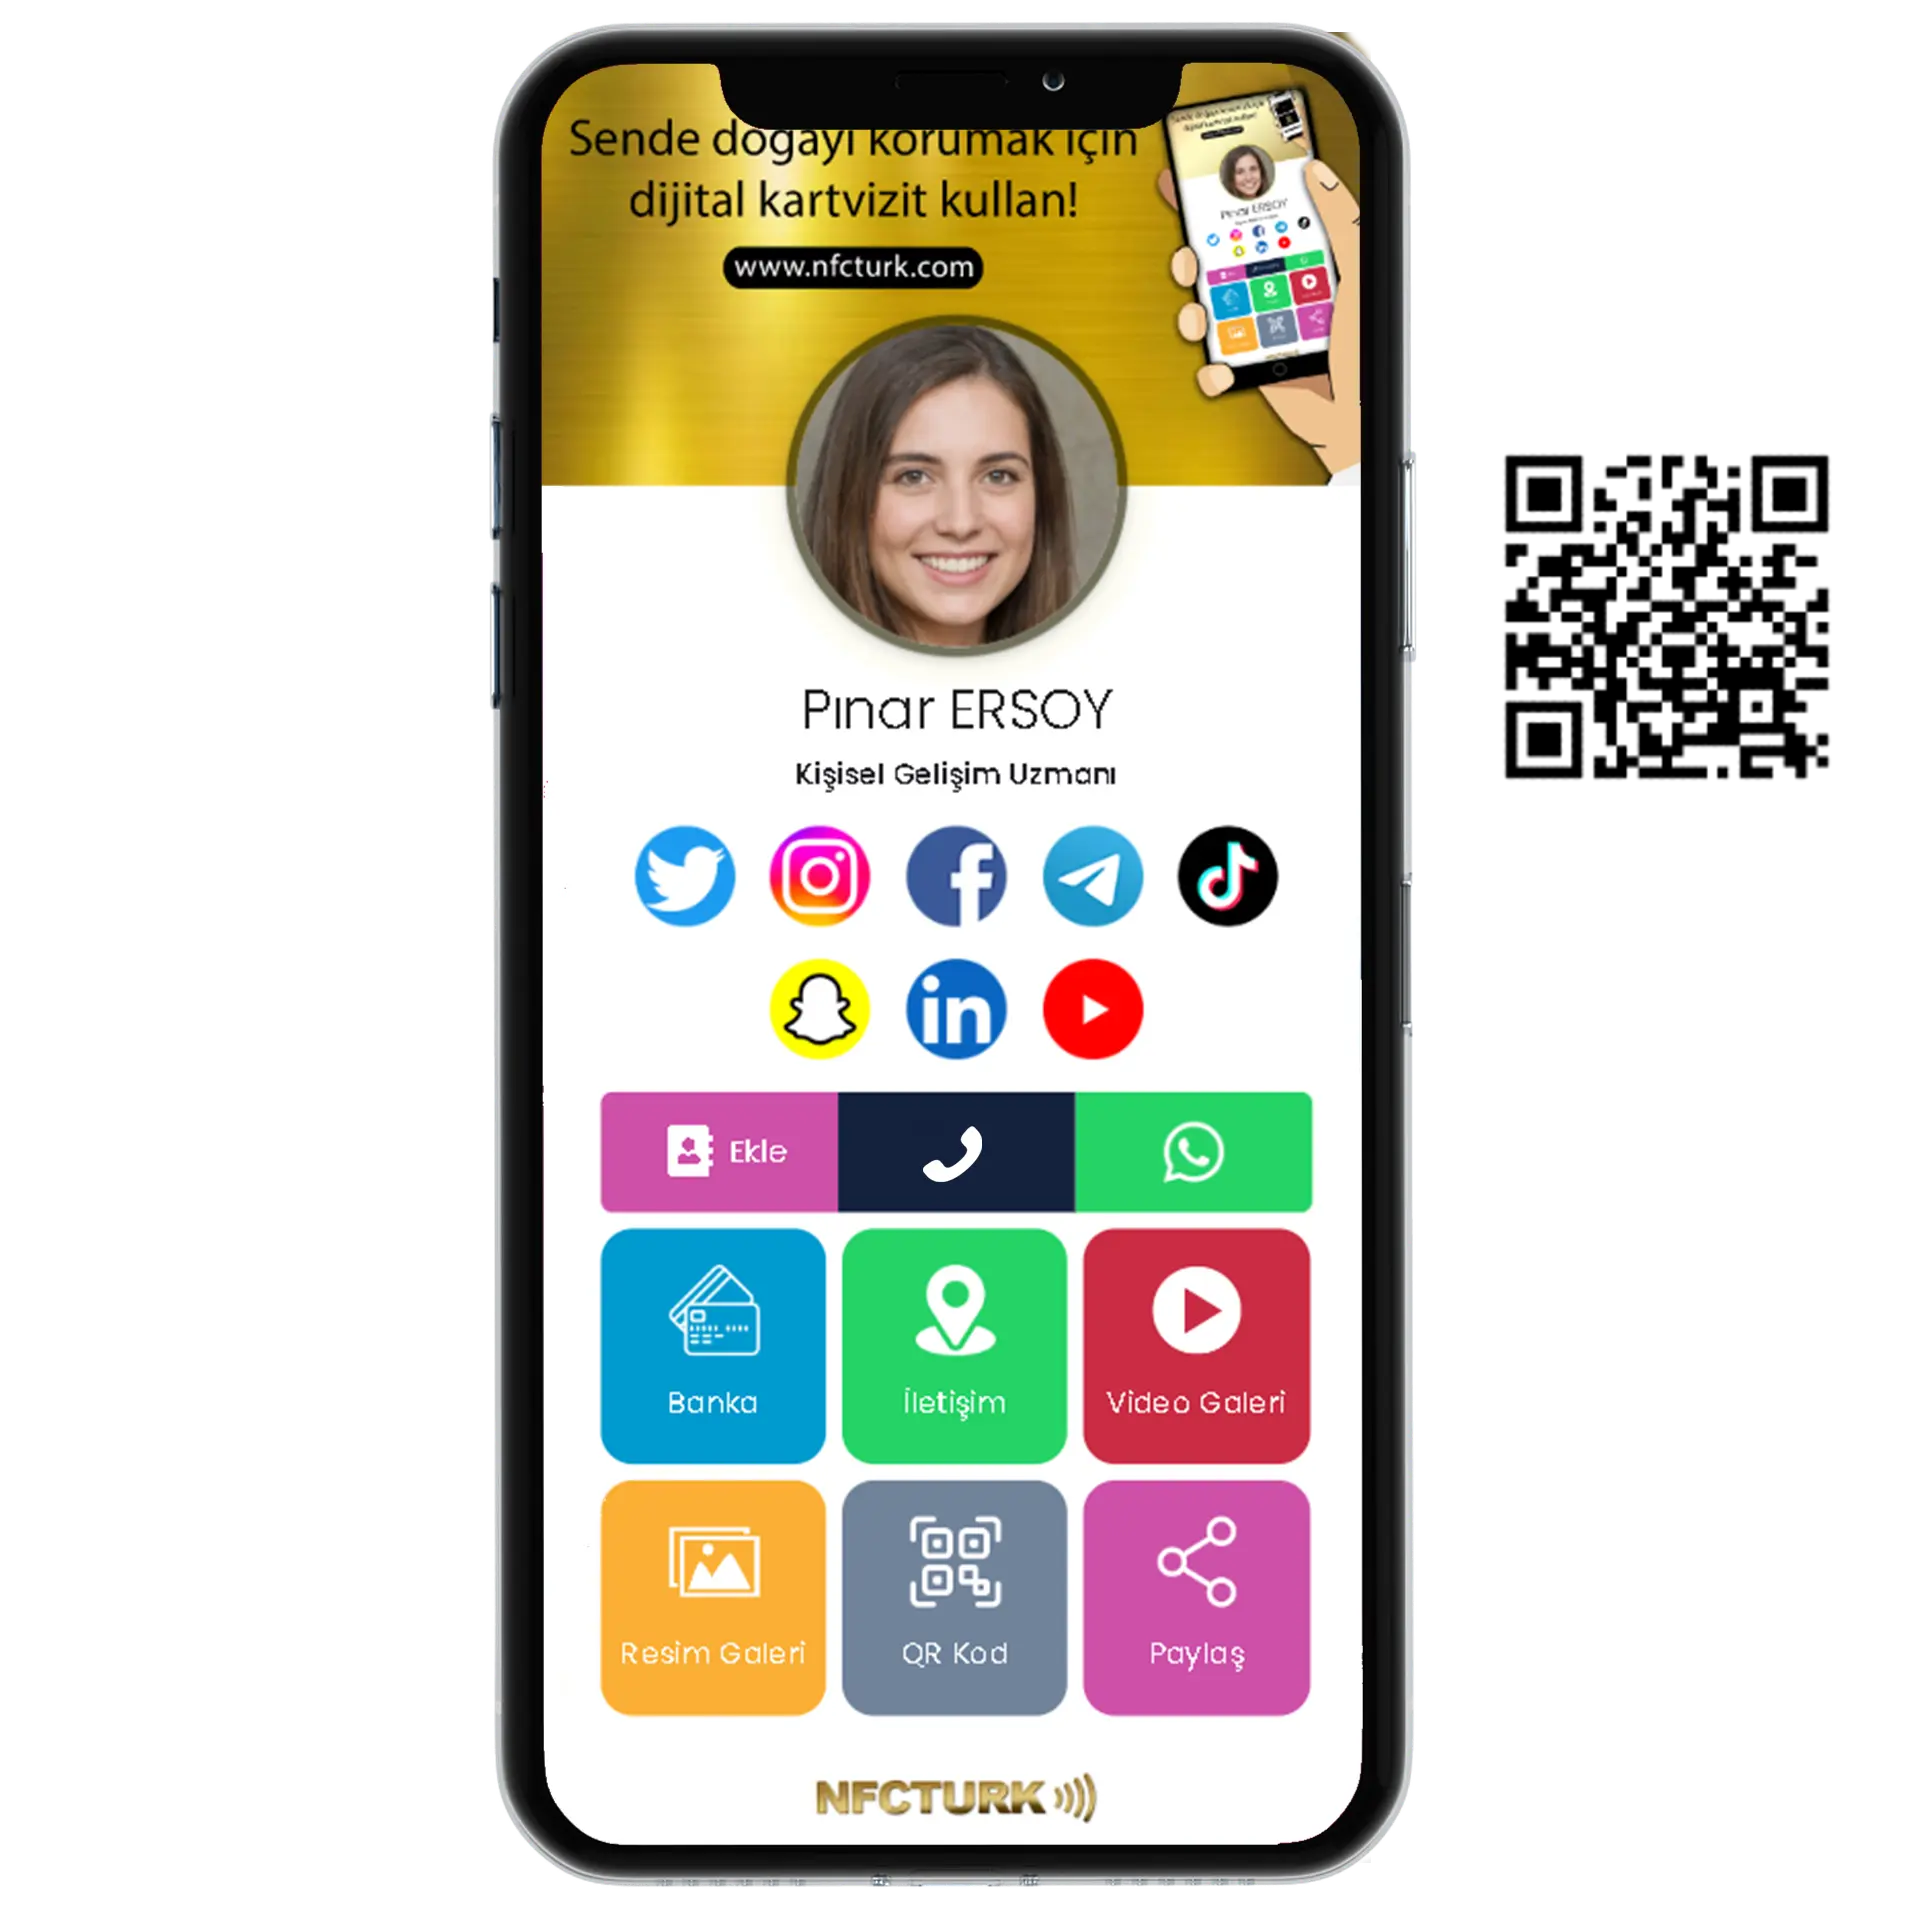 NFCTURK Digital Card- YOUR CORPORATE FACE IN THE DIGITAL WORLD